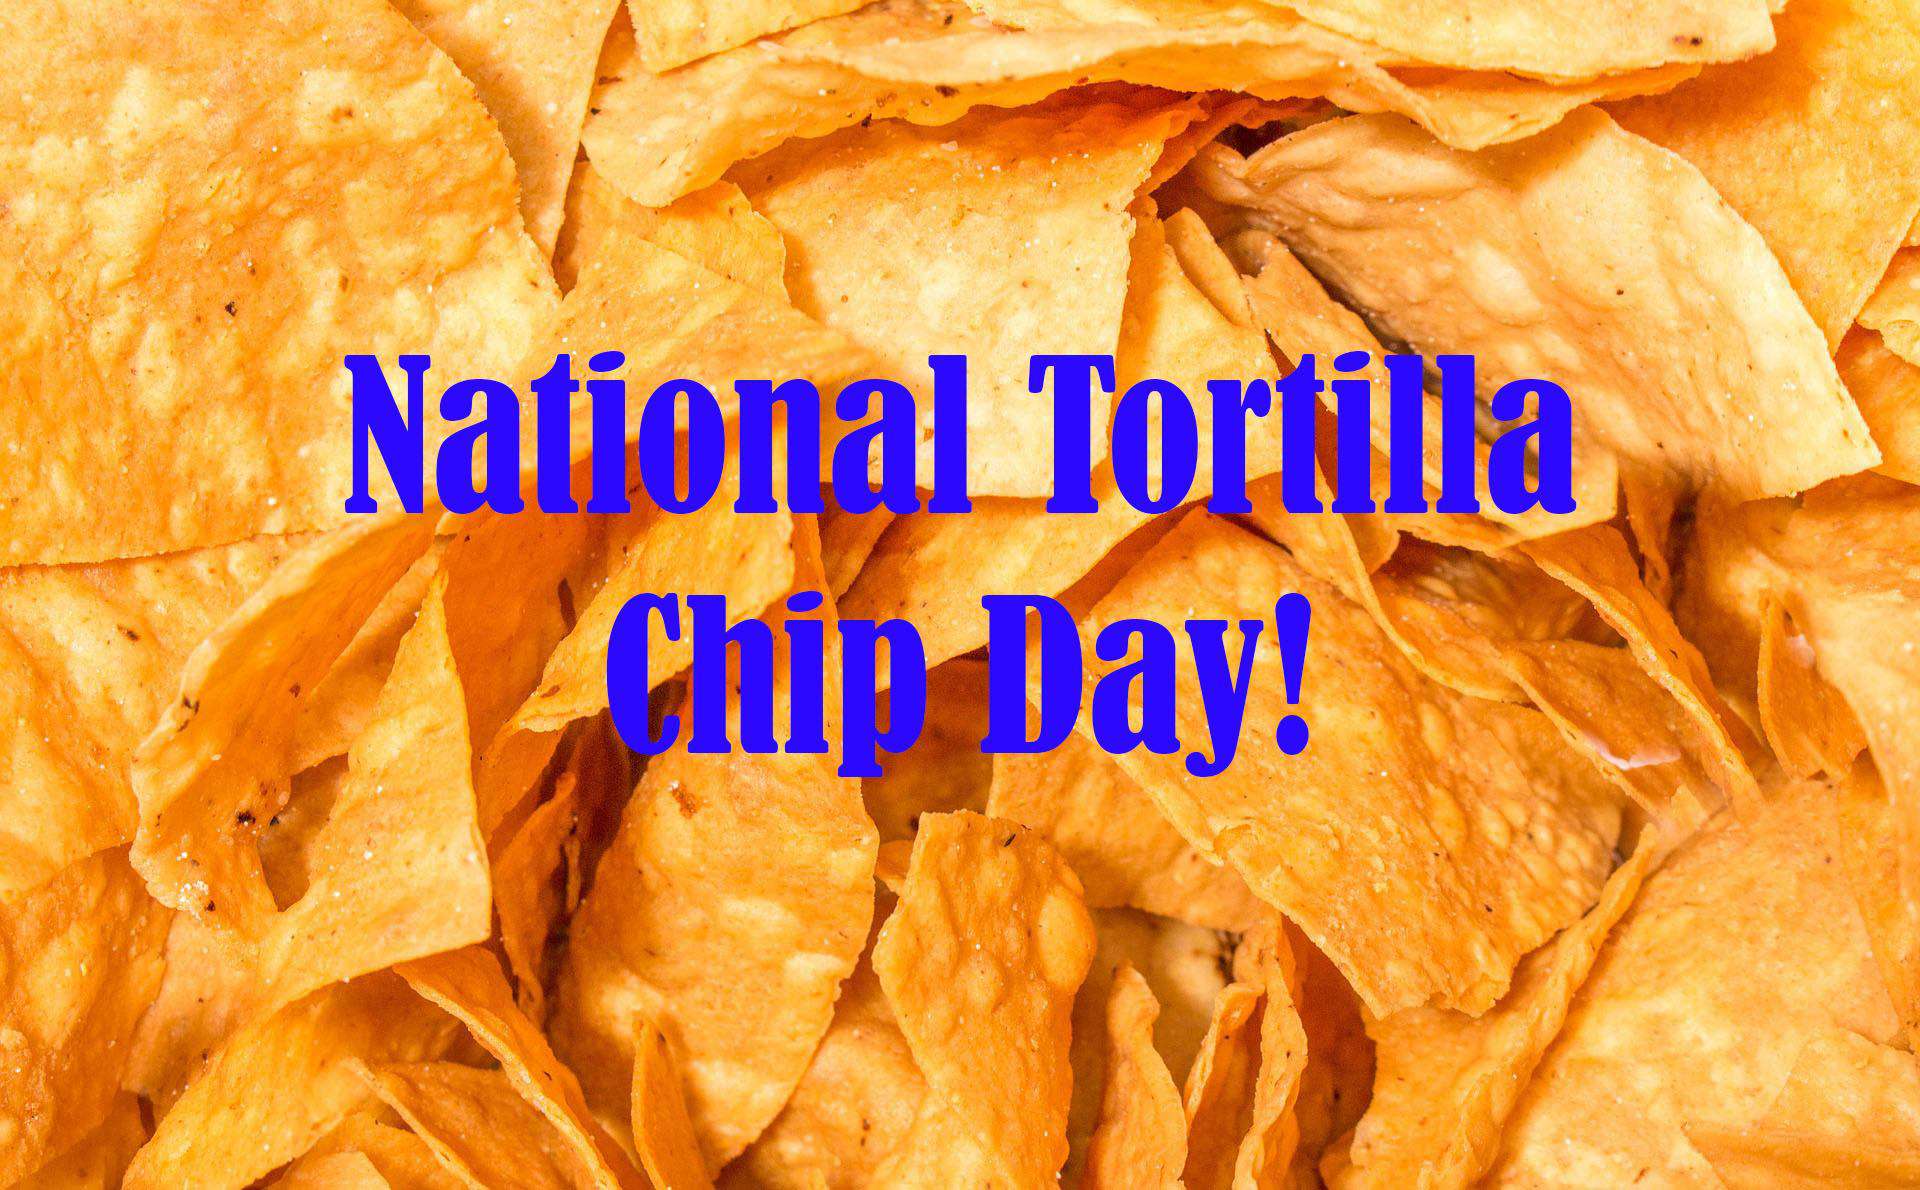 National Tortilla Chip Day Wishes for Instagram